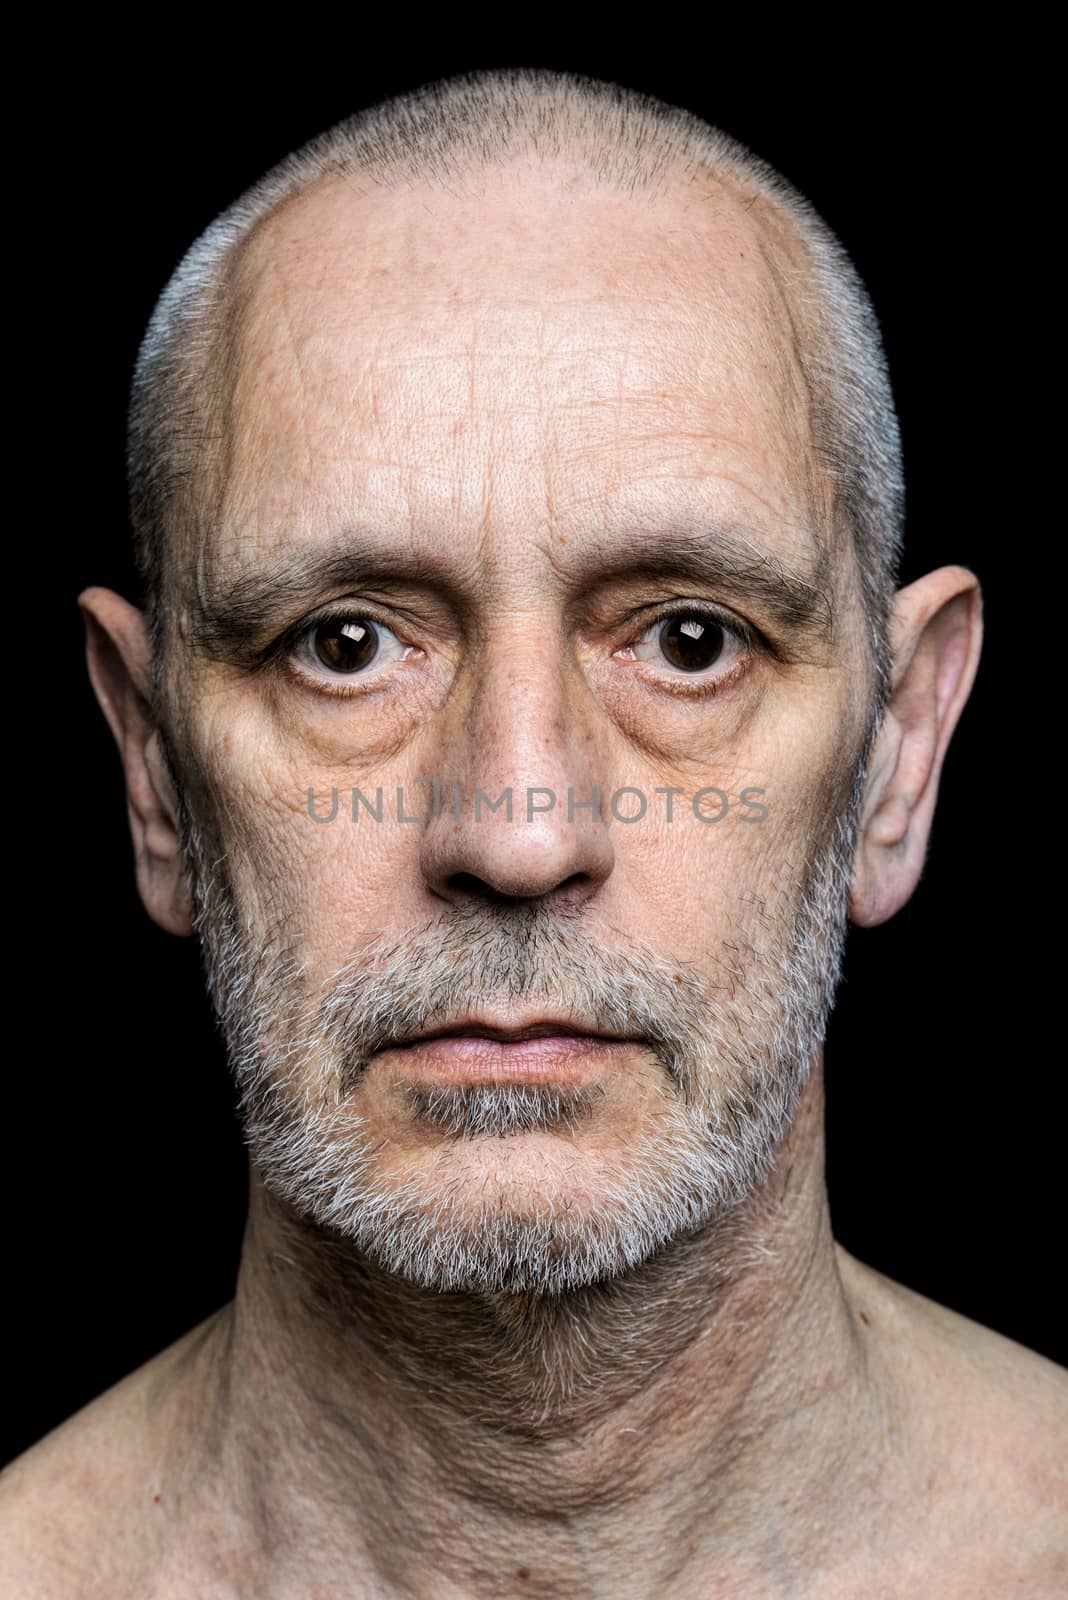 Dramatic color portrait of an adult man with sad expression on black background